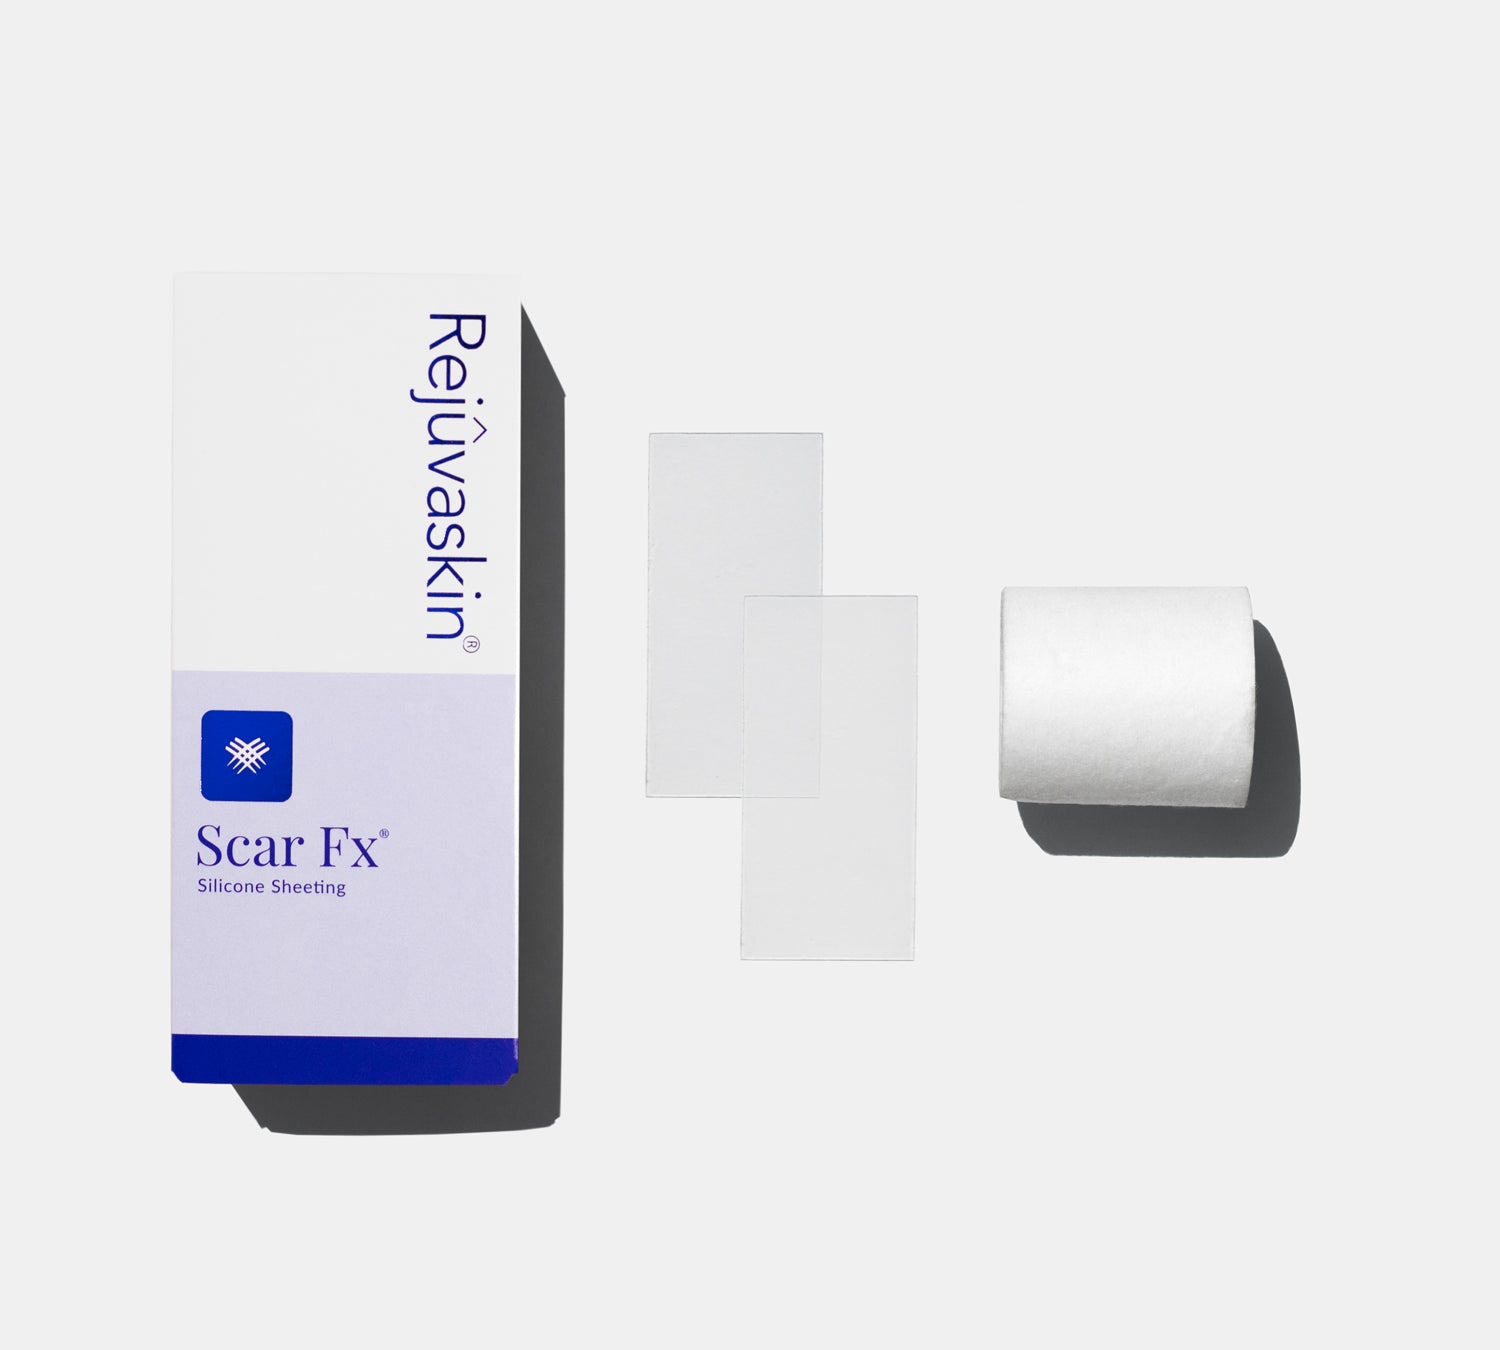 Scar Fx Silicone Sheeting For Breast Procedures